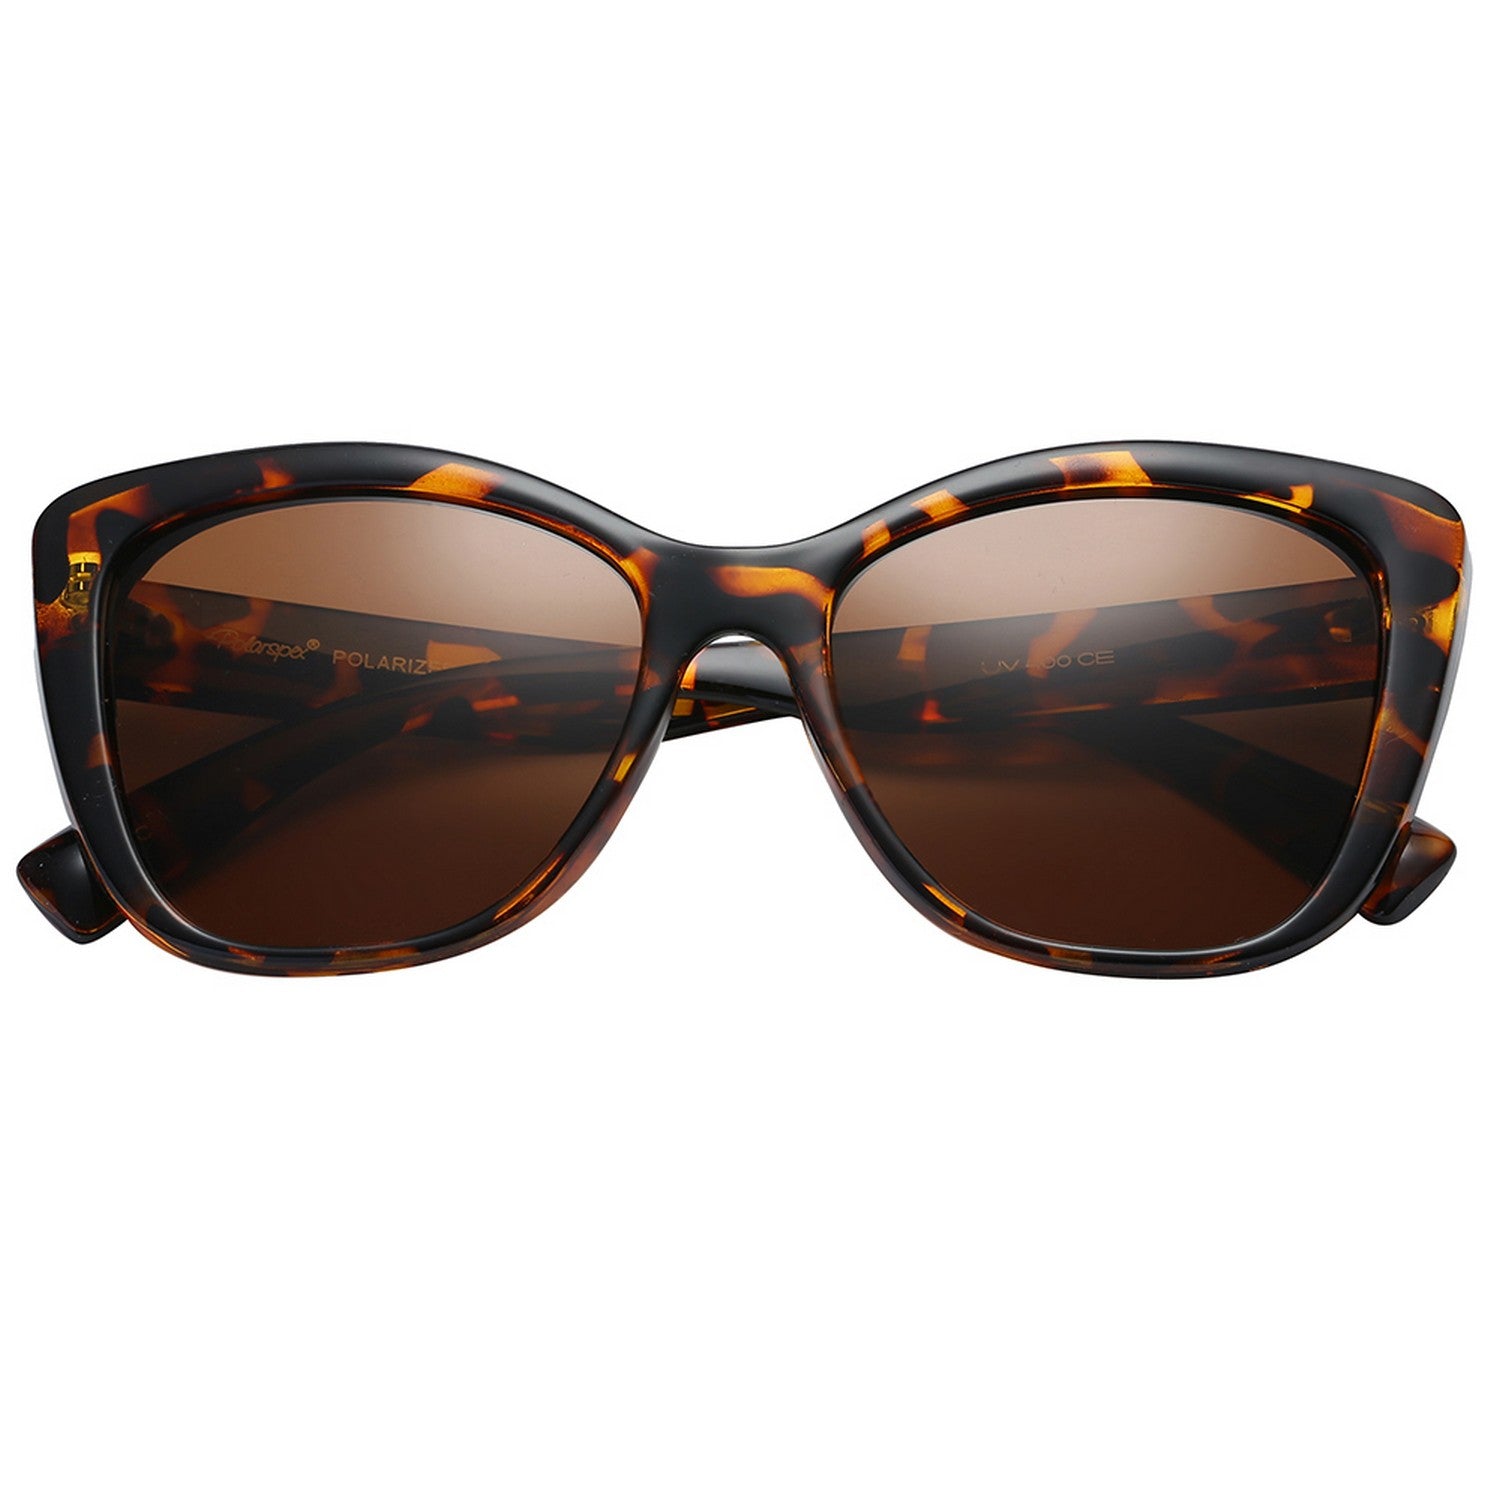 Polarspex Polarized Jackie-O Cat Eyes Style Sunglasses with Brown Tortoise Frames and Polarized Brown Lenses for Women